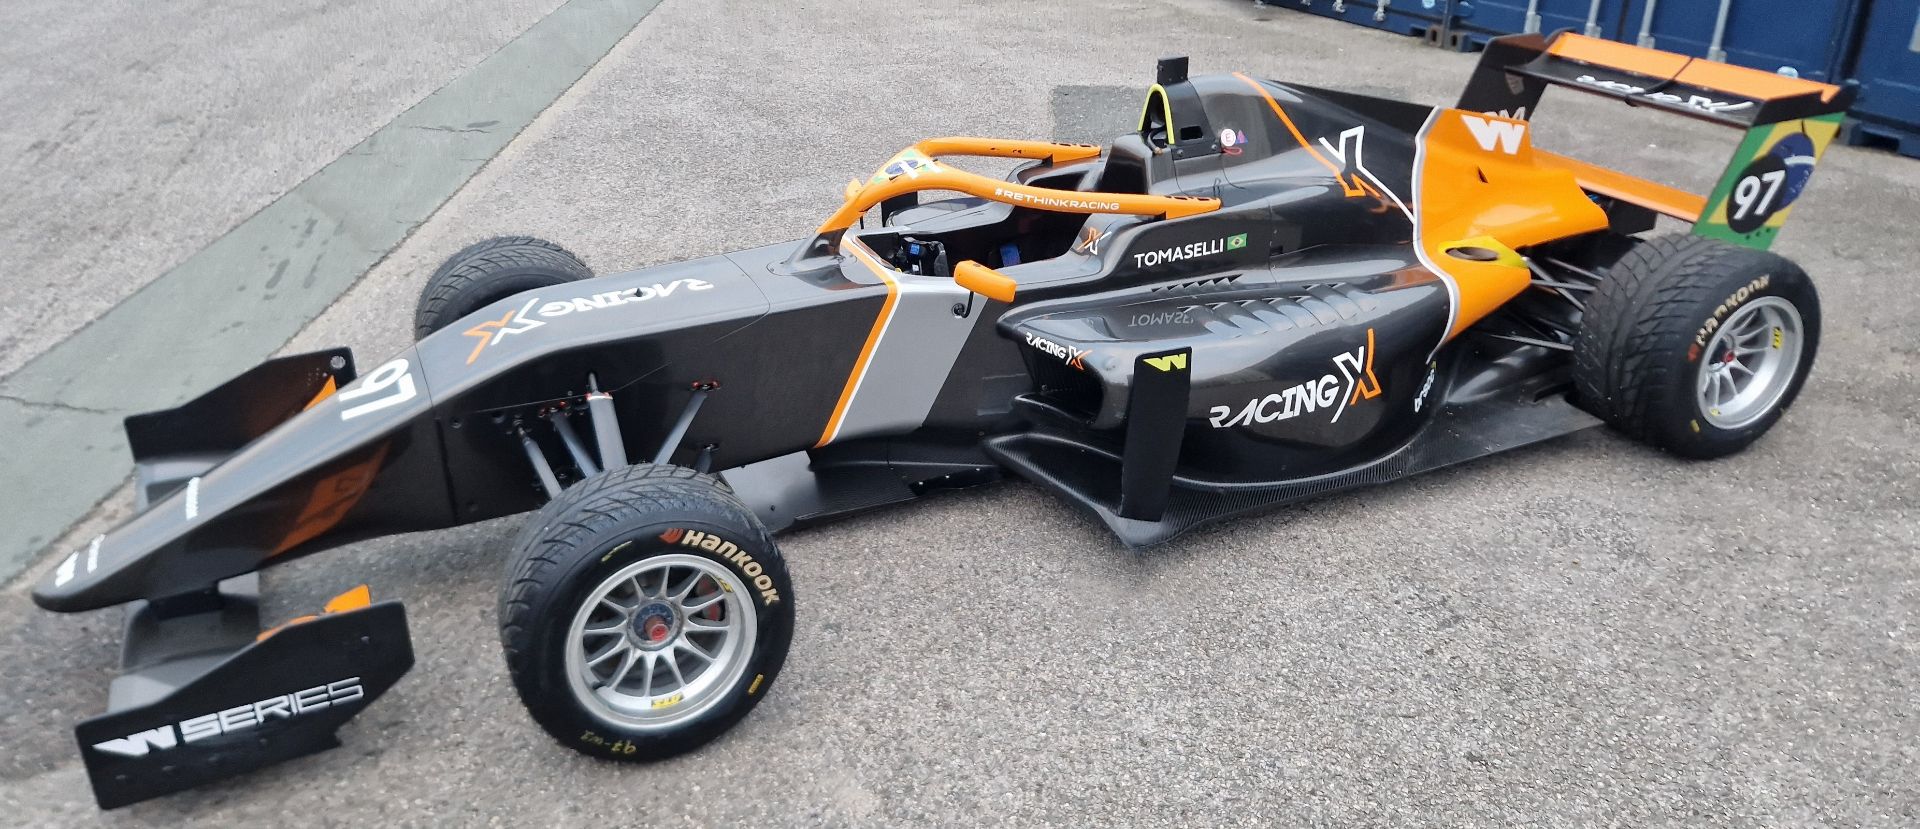 One TATUUS F3 T-318 Alfa Romeo Race Car Chassis No. 063 (2019) Finished in RACING X Livery as Driven